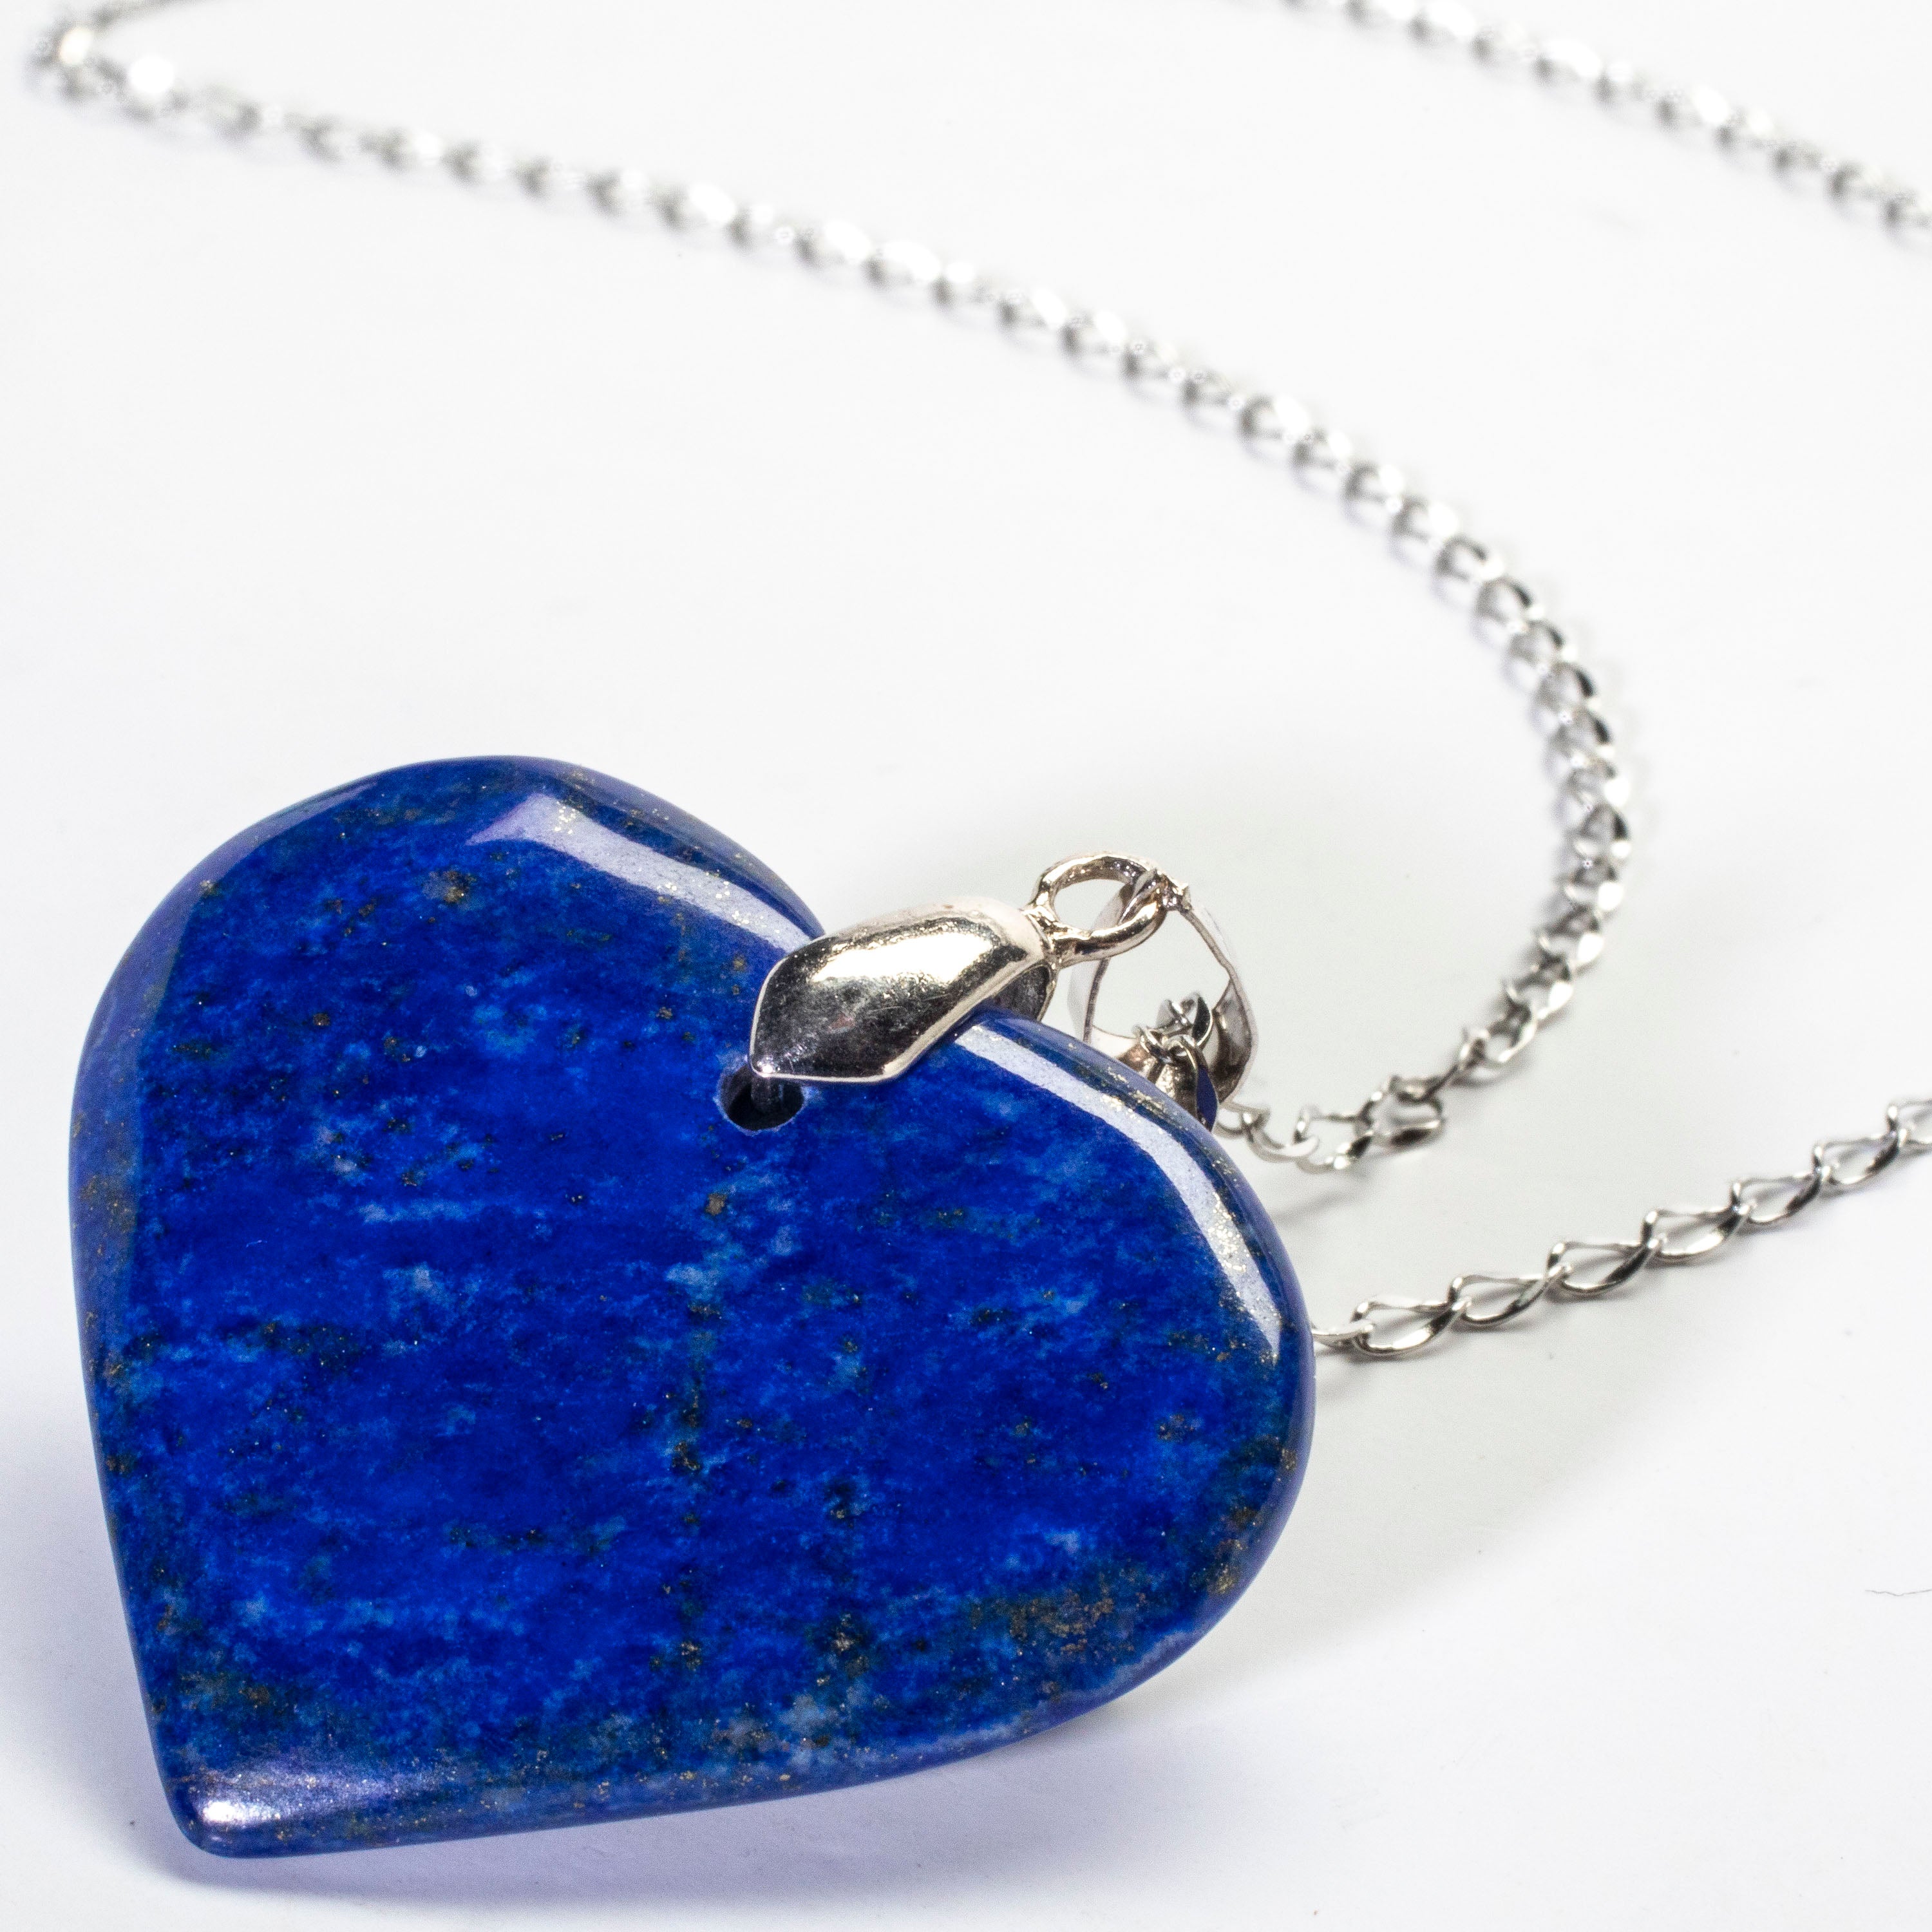 Everything You Need To Know About Lapis Lazuli